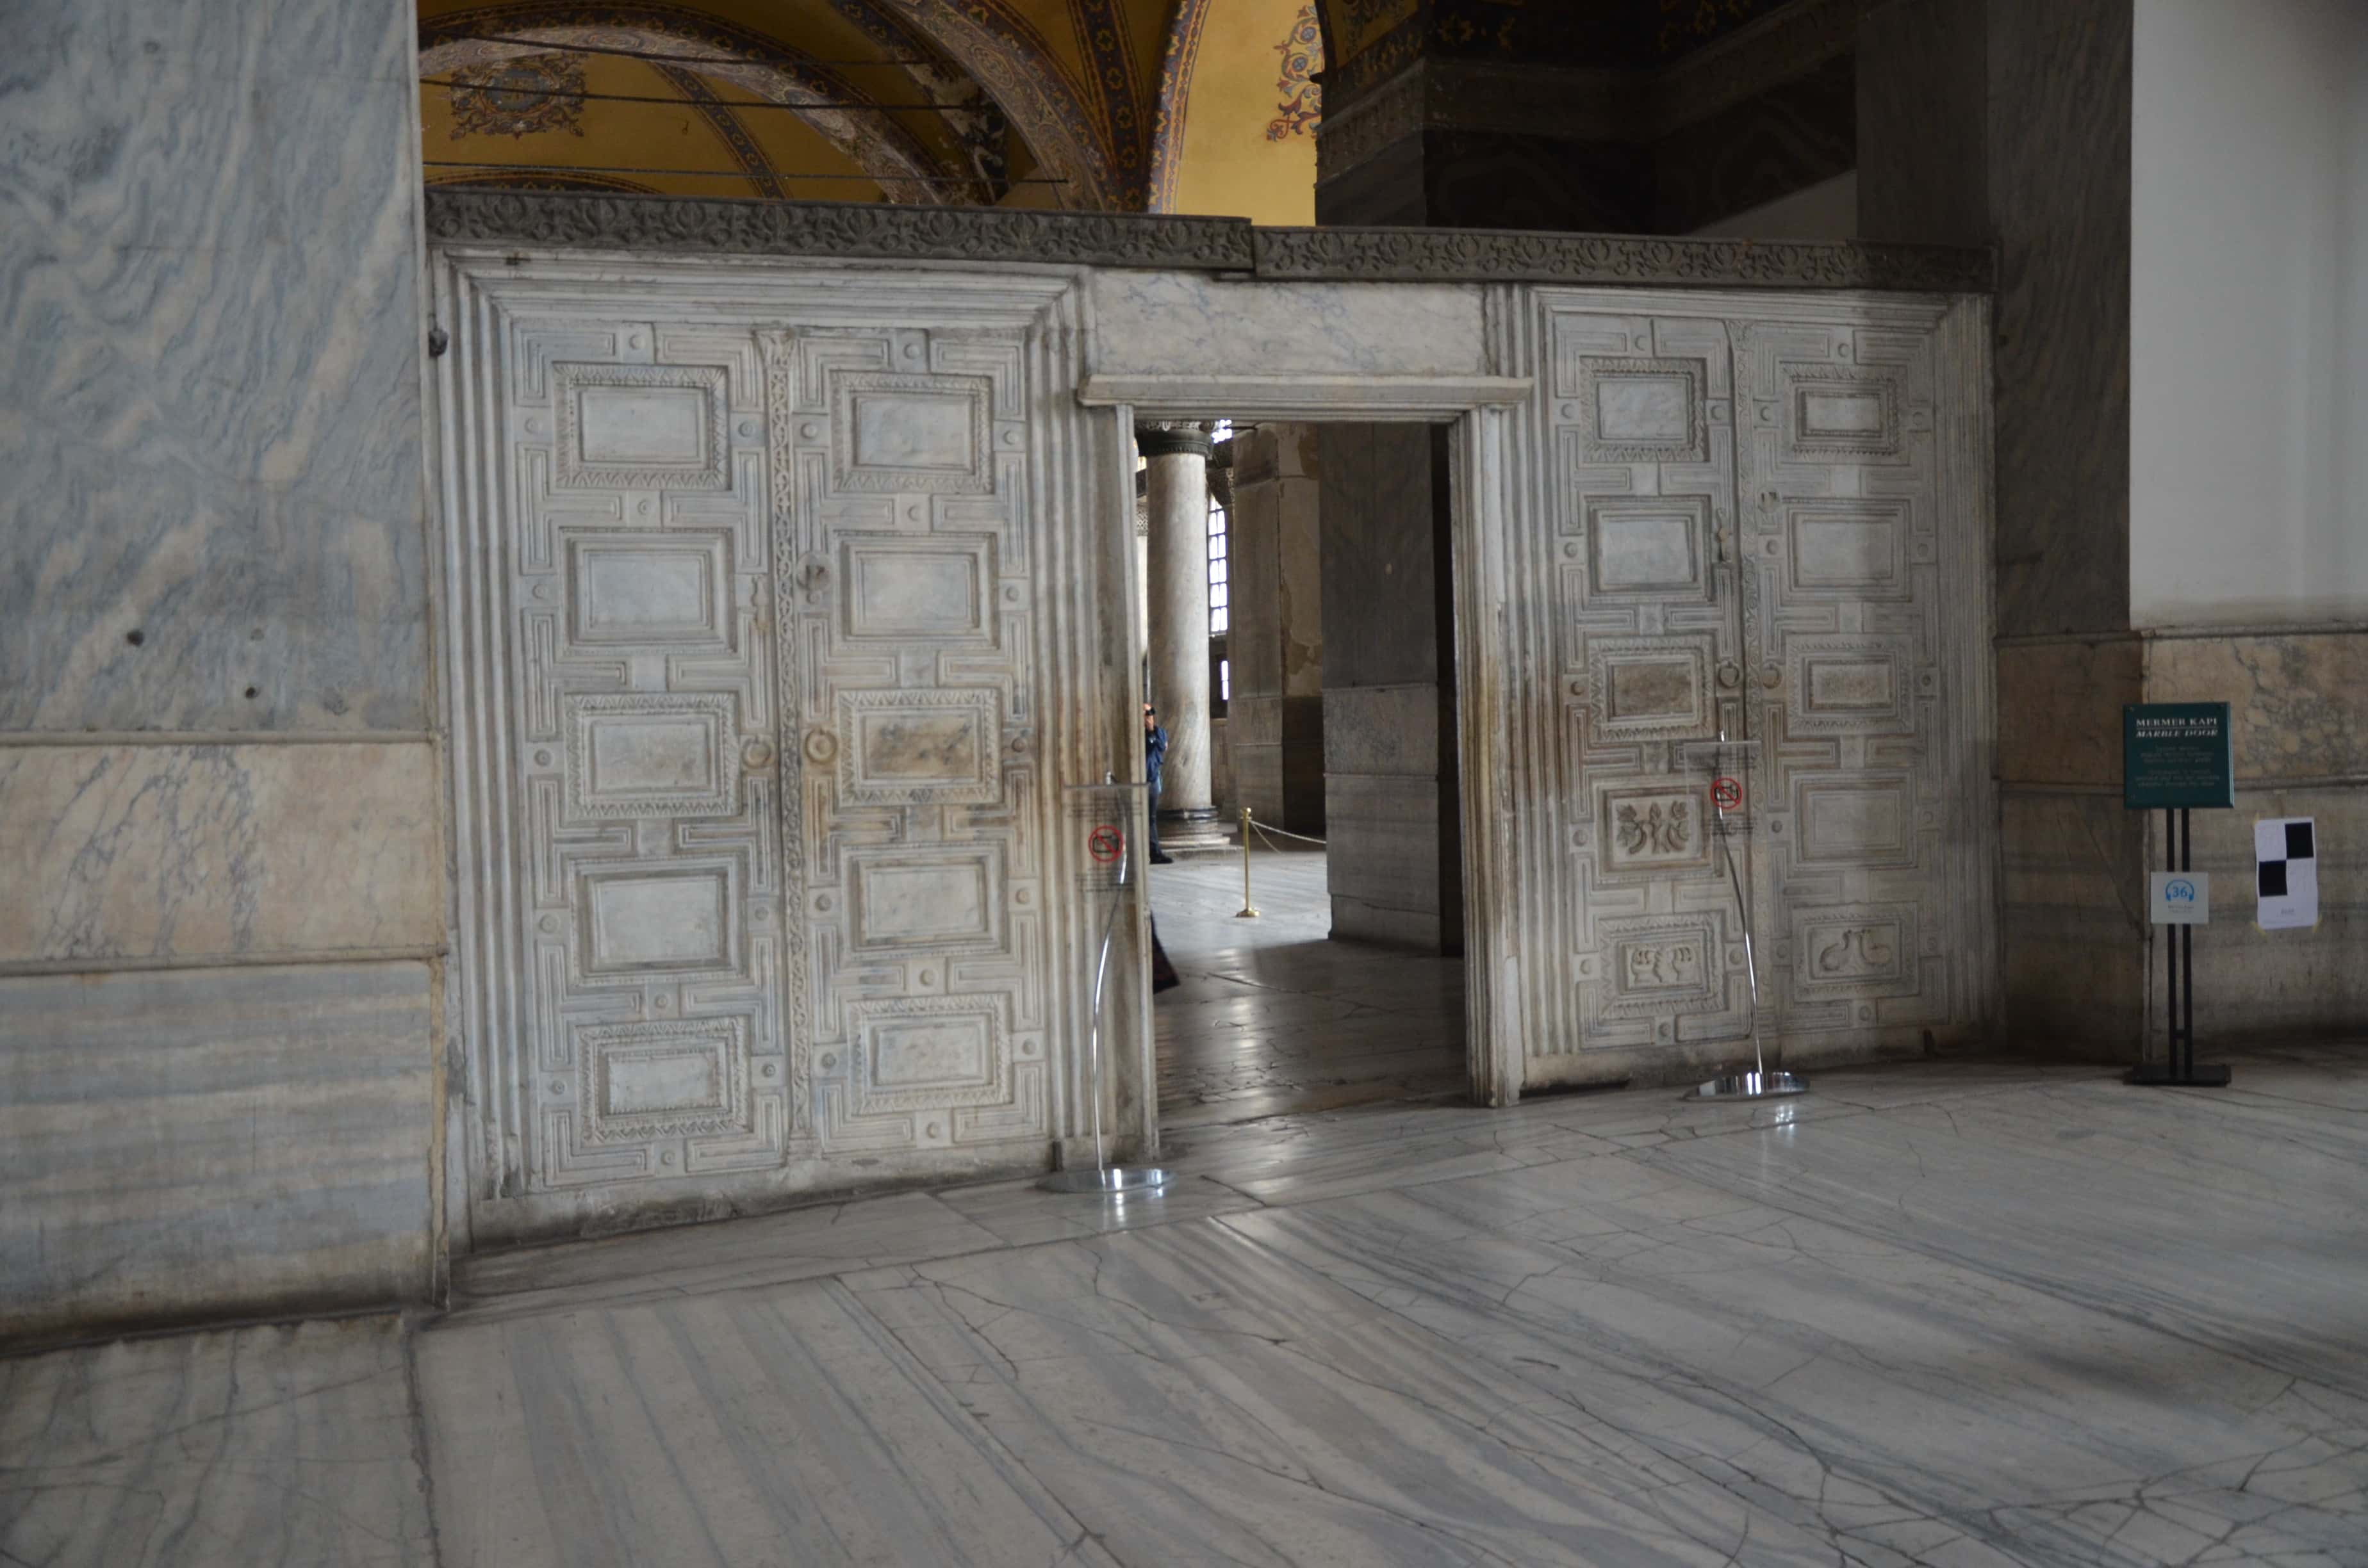 Door to the Holy and Sacred Synod at Hagia Sophia in Istanbul, Turkey